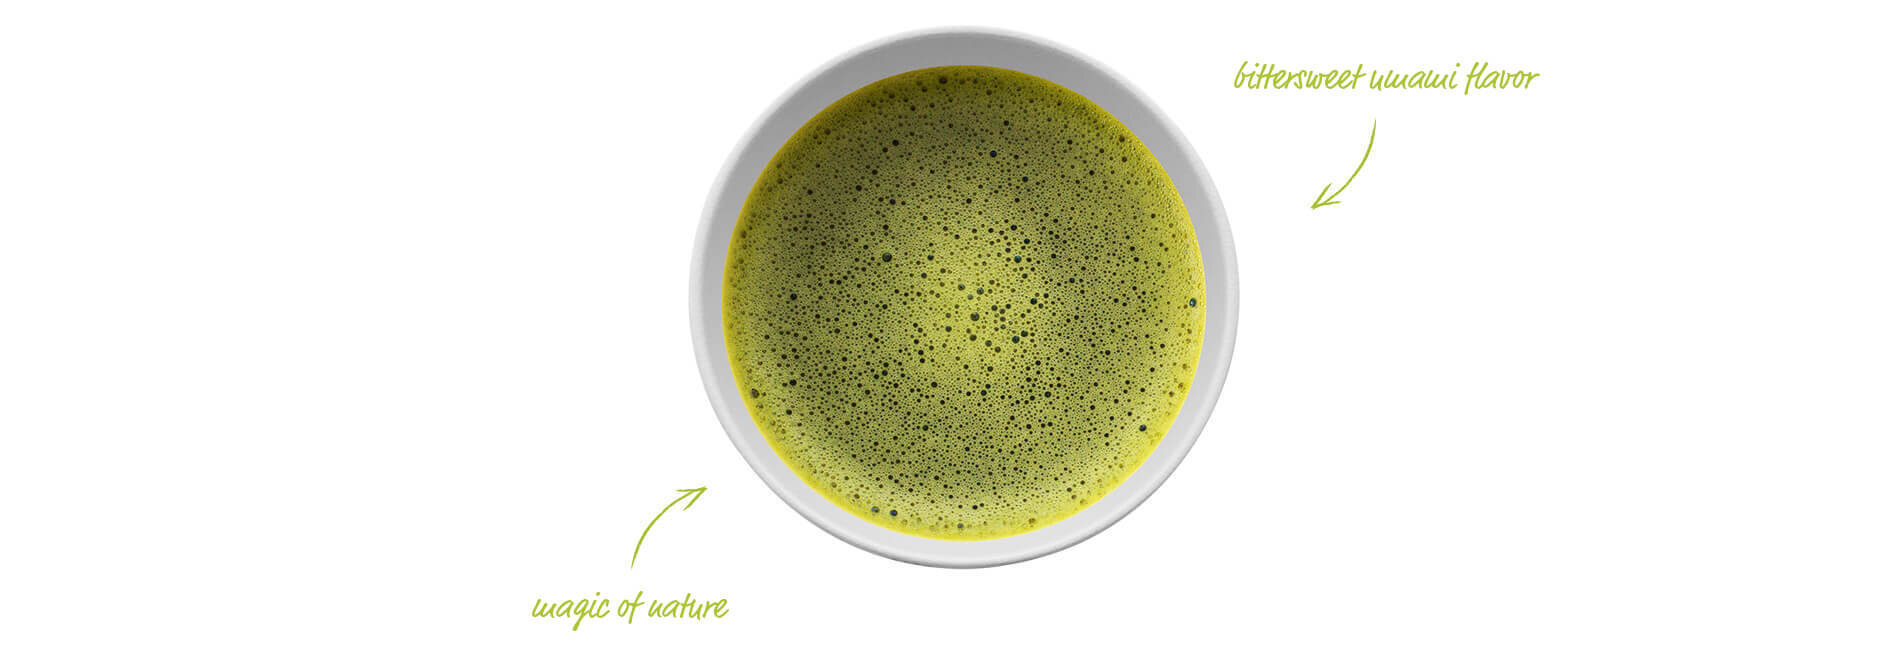 Matcha is good for your health